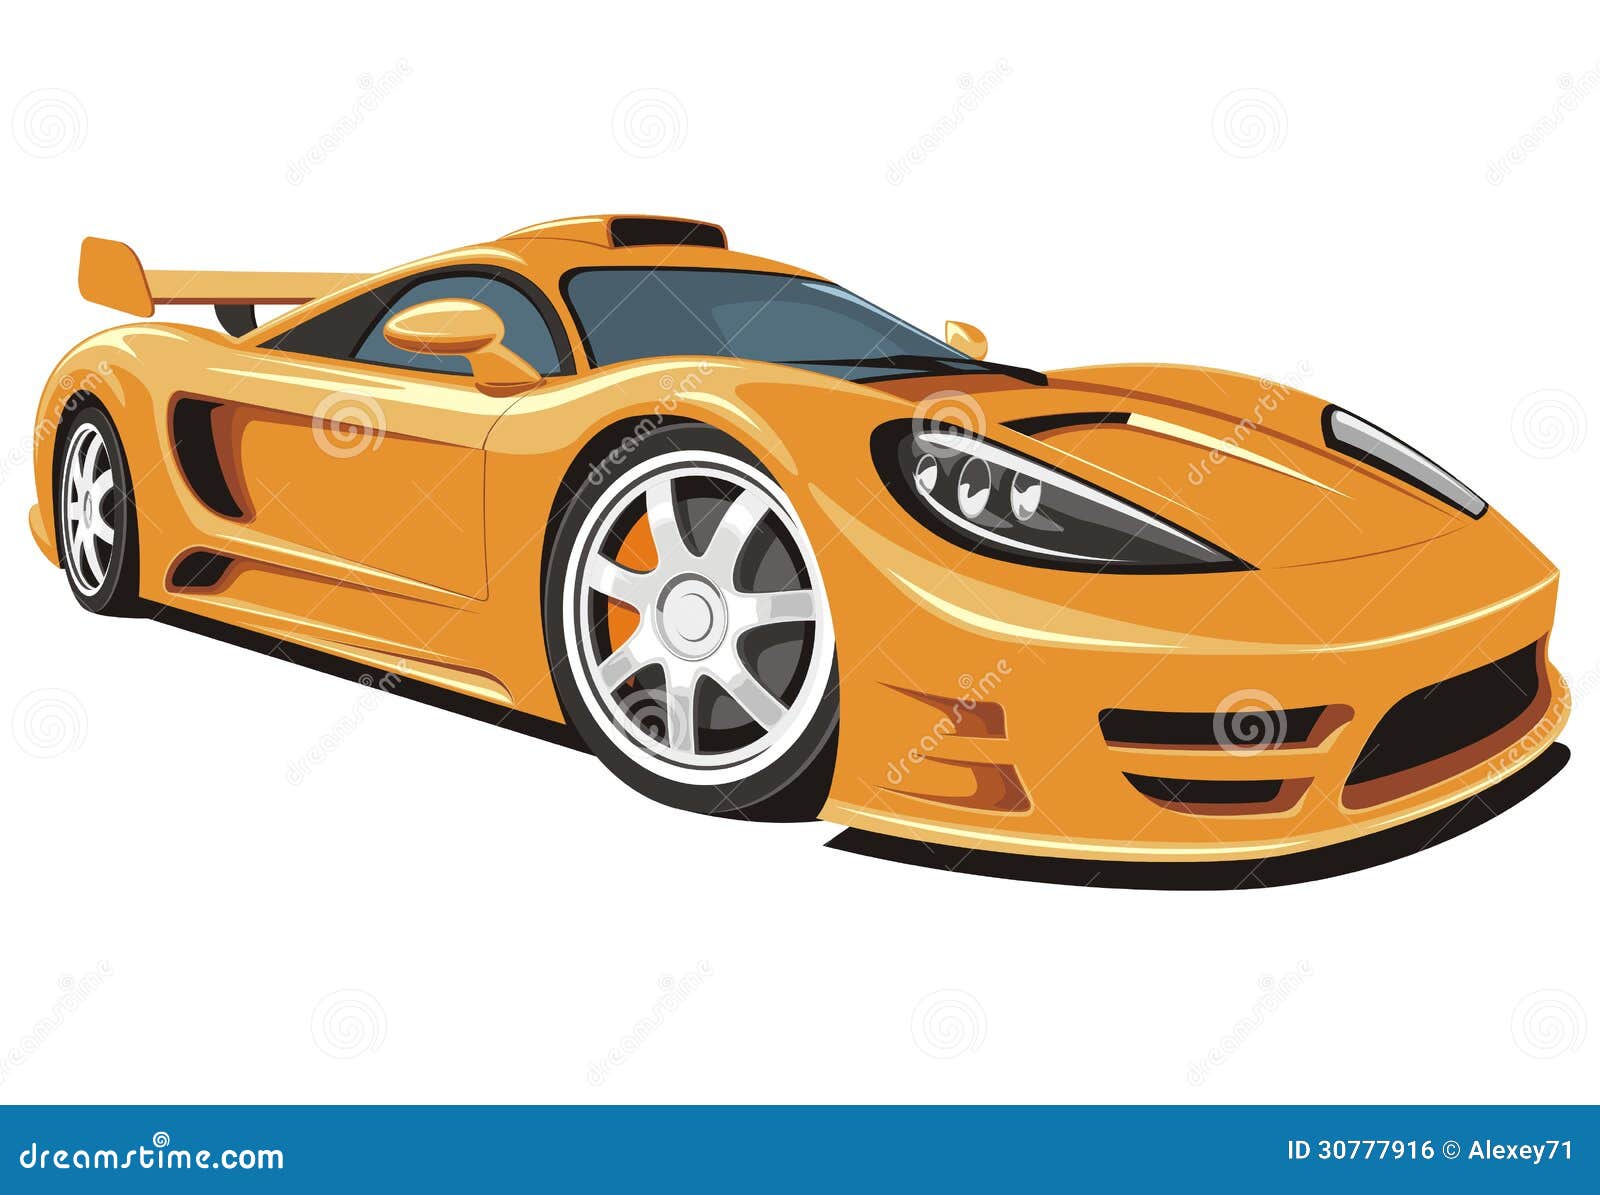 free clipart sport cars - photo #49